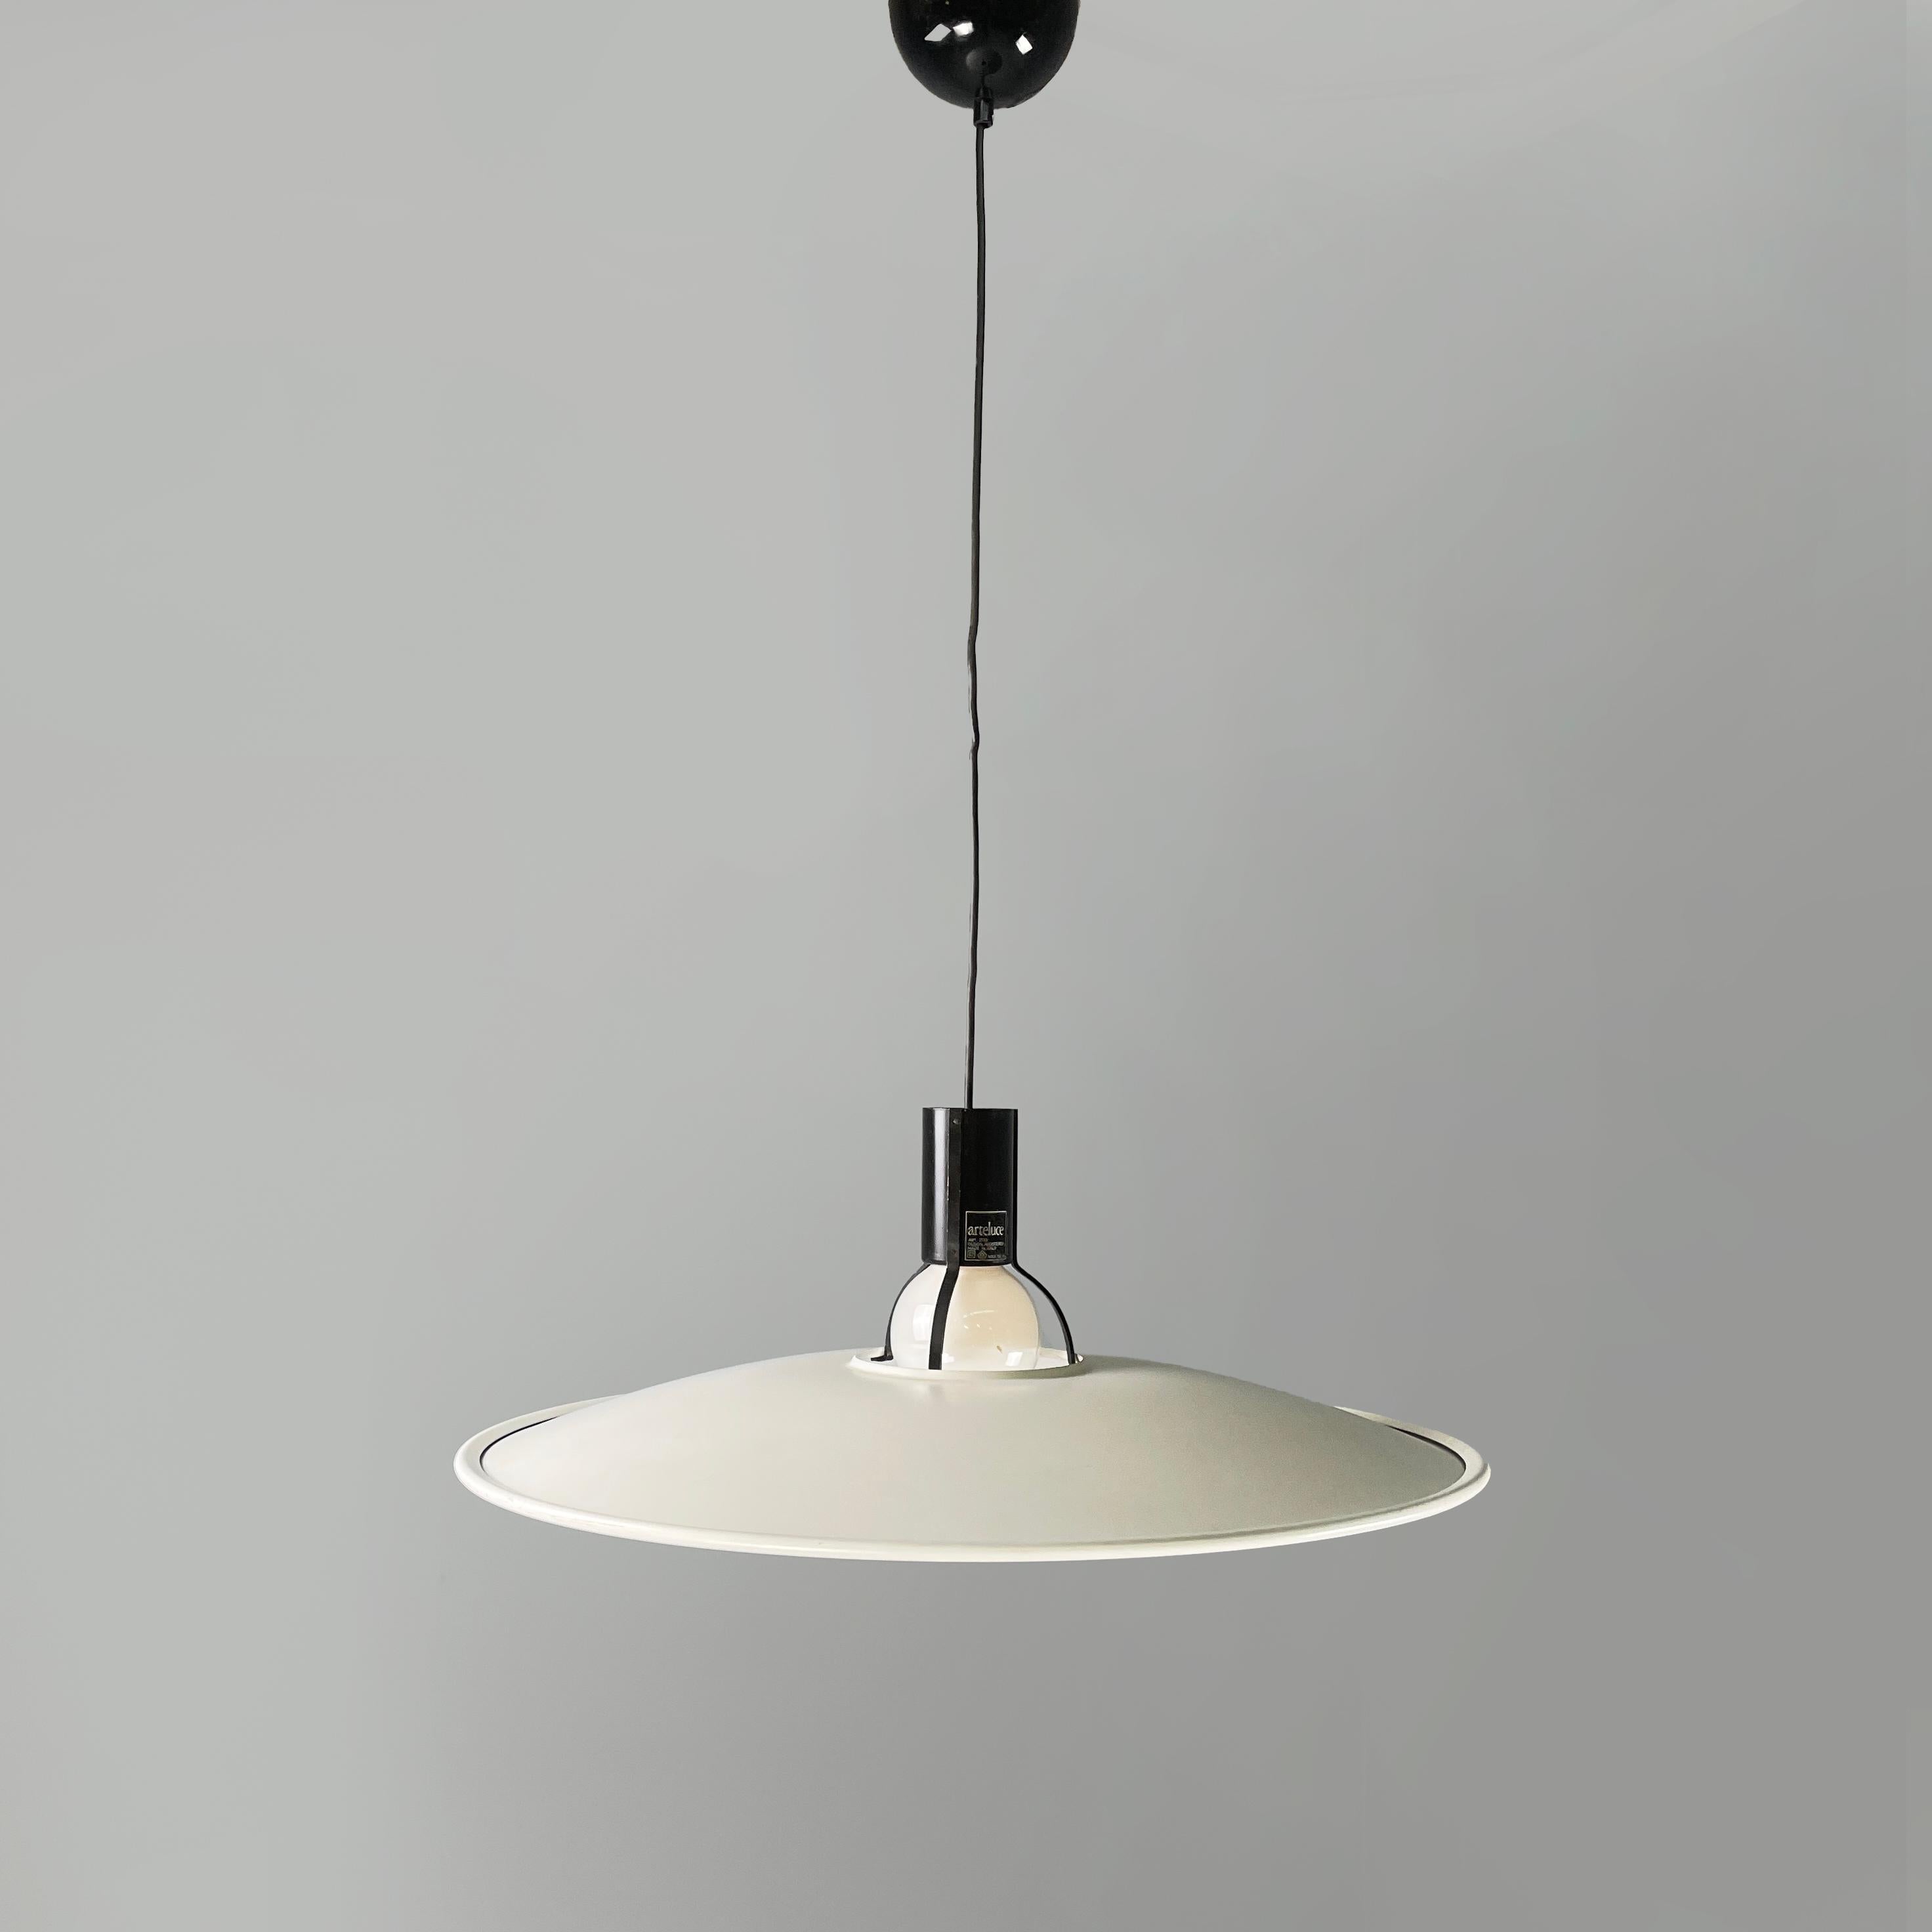 Italian modern White and black metal Chandelier 2133 by Gino Sarfatti for Arteluce, 1970s
Chandelier mod. 2133 with round lampshade in matt white painted metal with folded metal edge around the entire perimeter. In the center there is the black